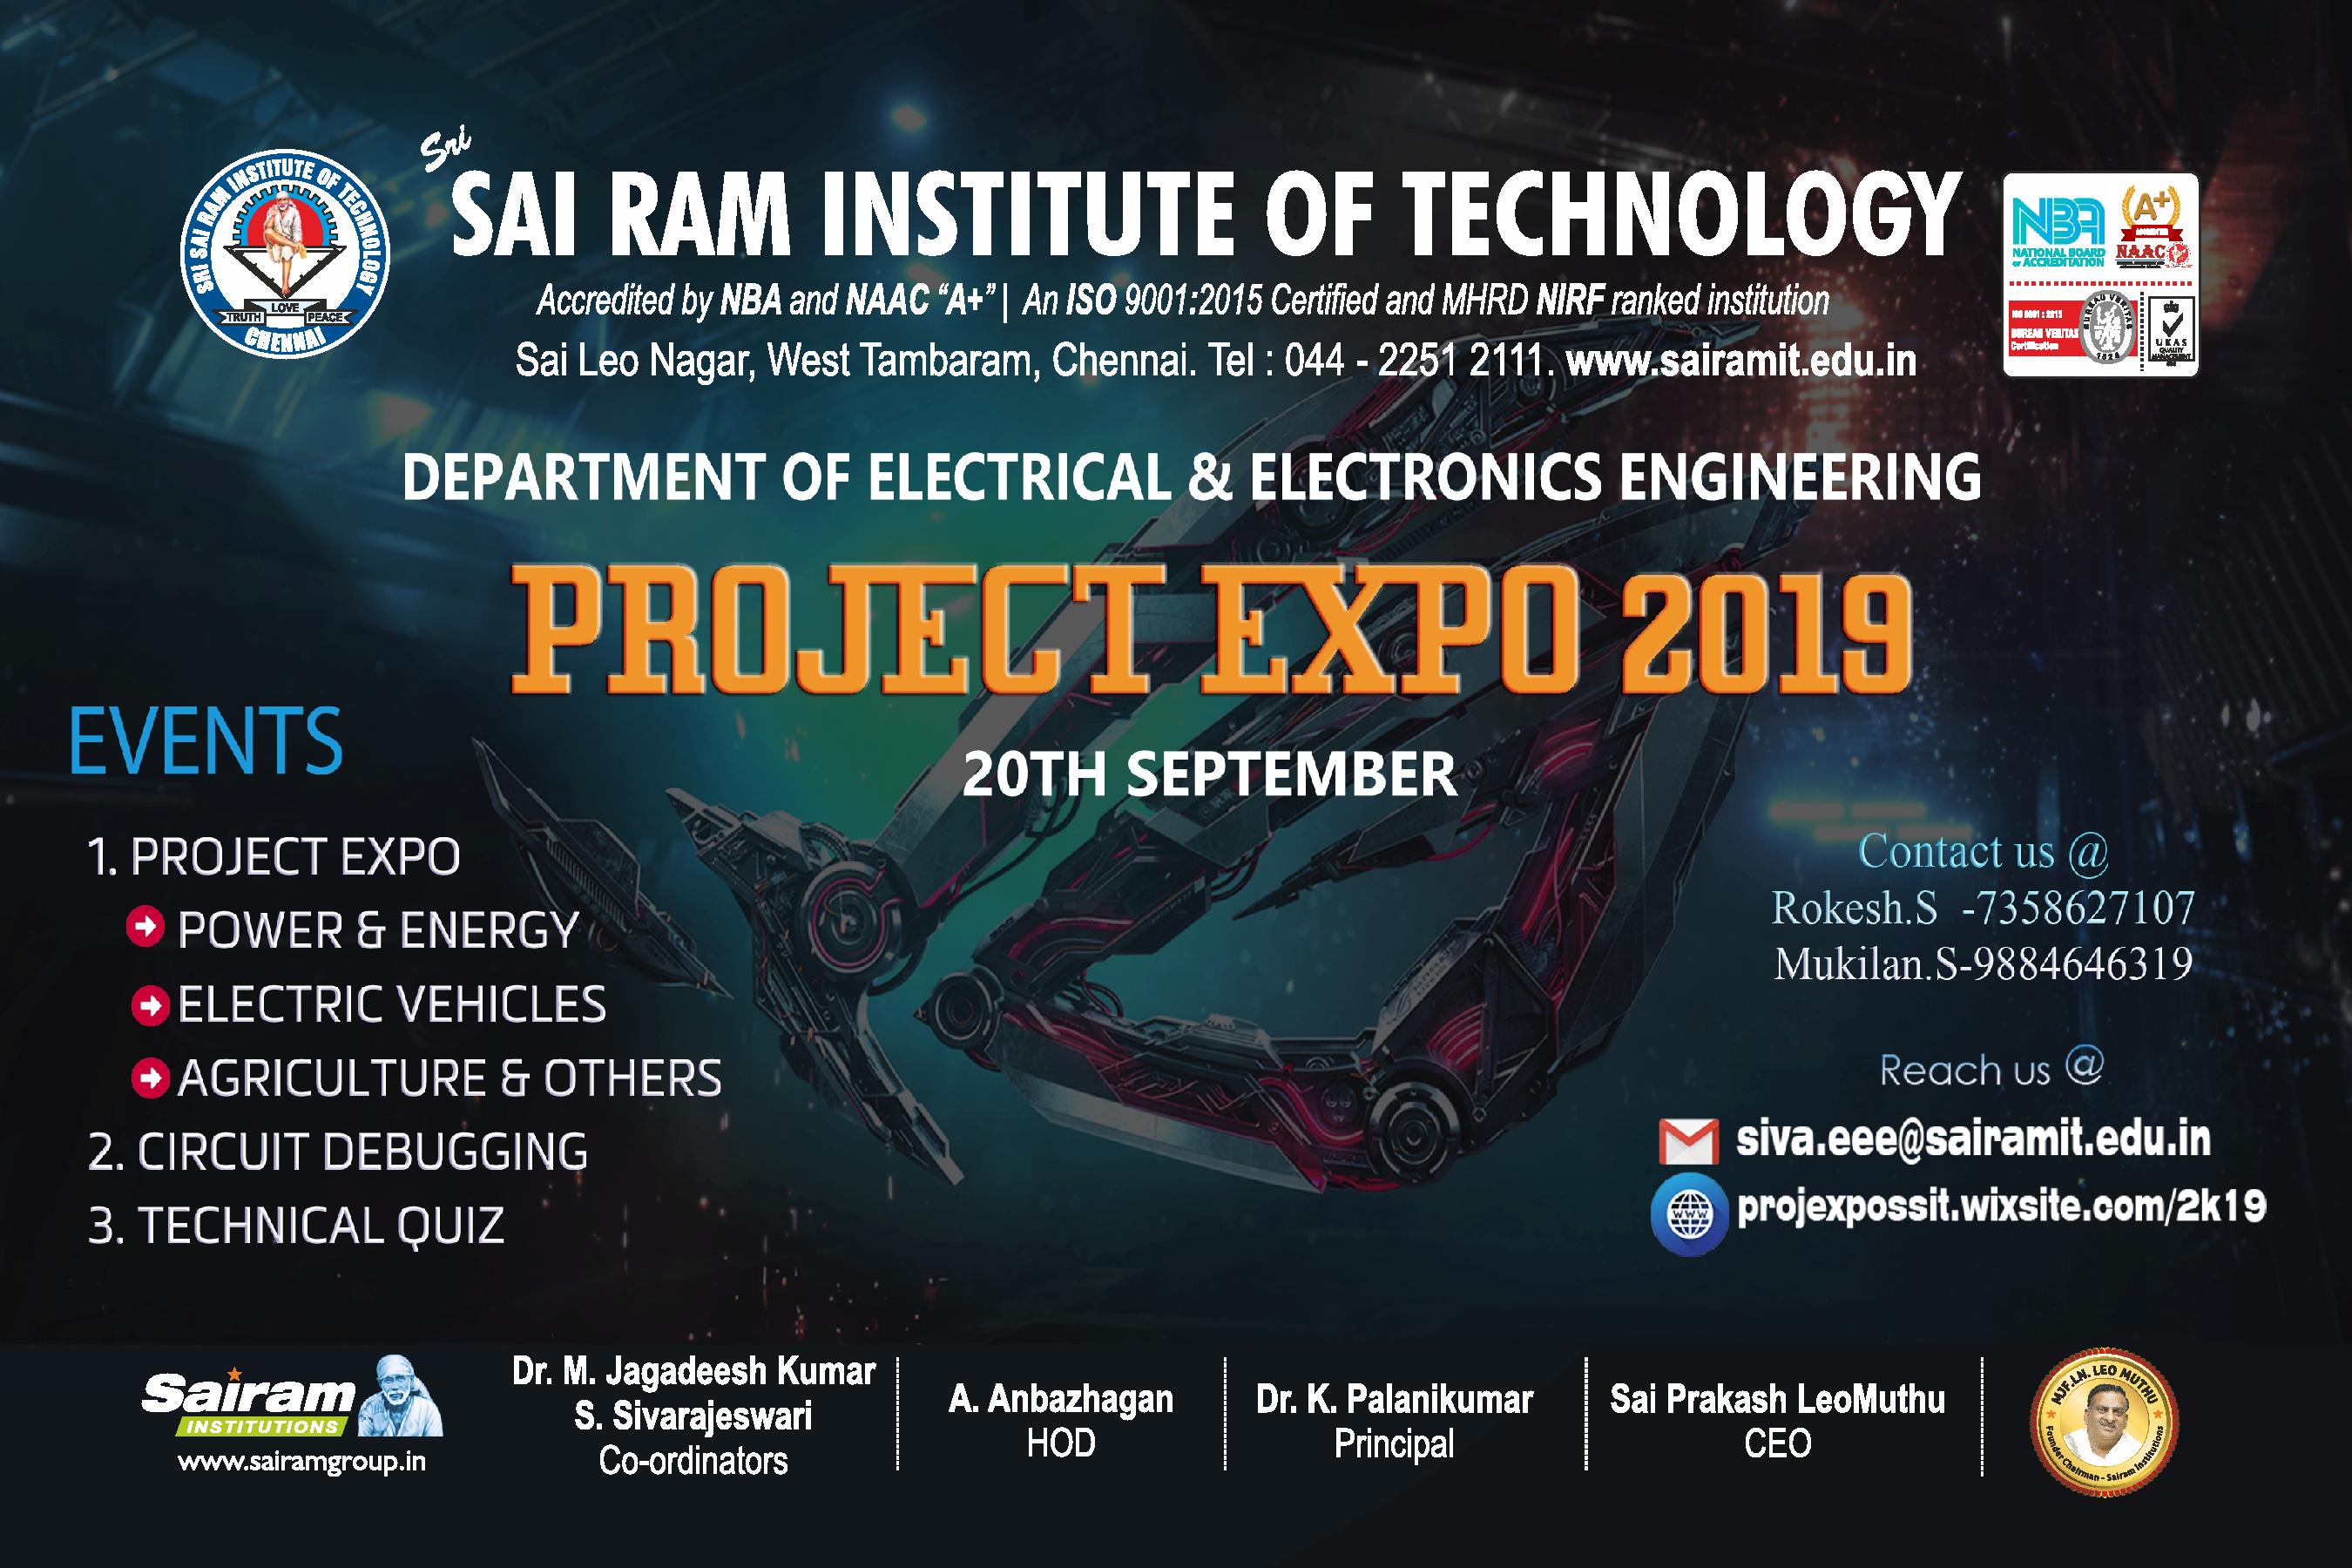 Project Expo 2019, Sri Sairam Institute of Technology, Project Expo